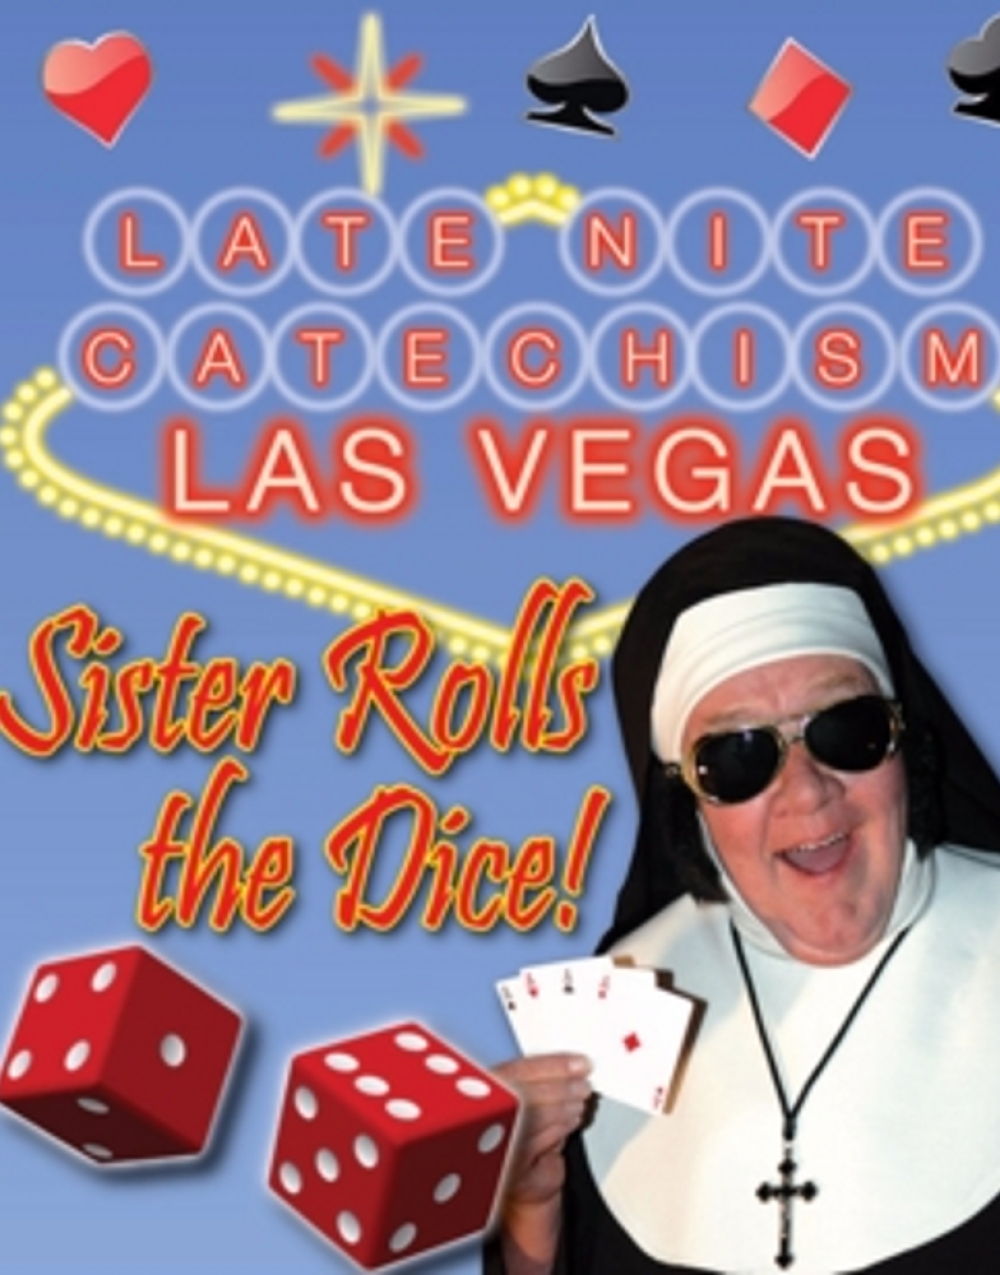 Late Nite Catechism: Las Vegas! - The Avenel Performing Arts Center Stage Mag